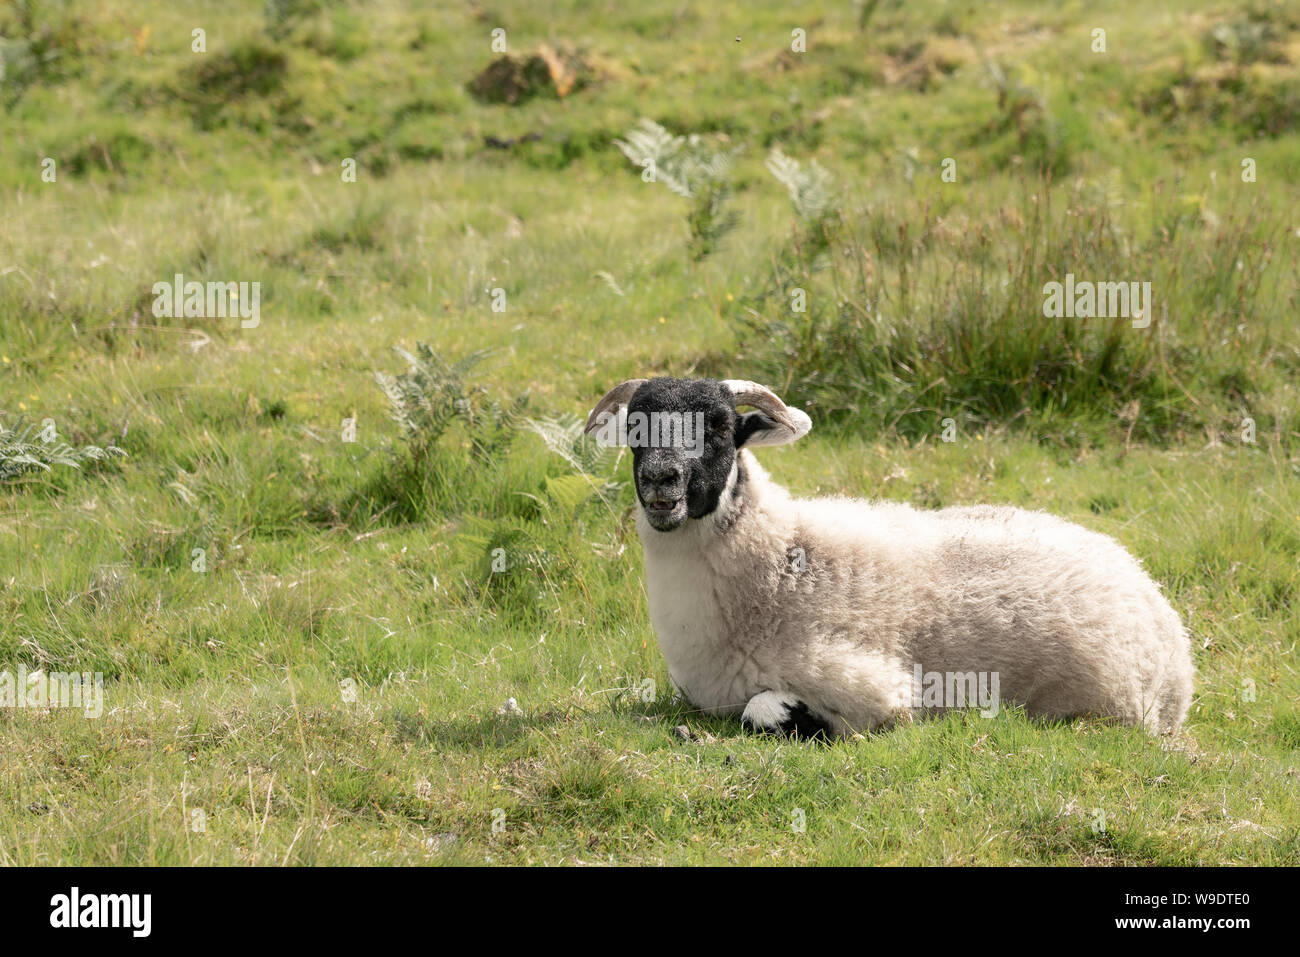 Young sheep (Ovis aries) on field during summer day Stock Photo